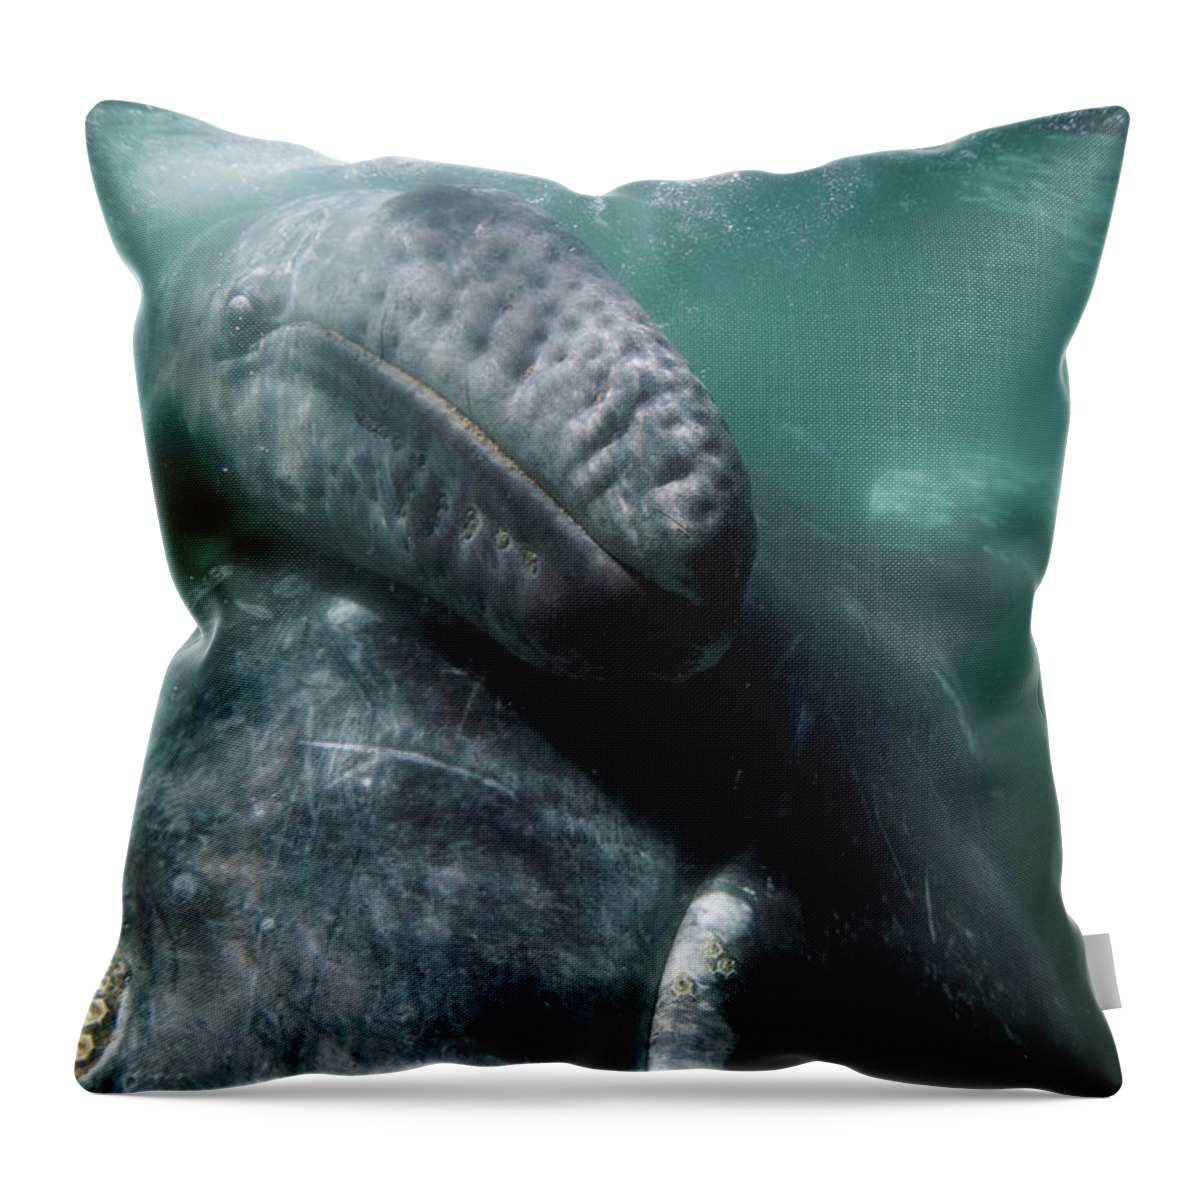 00568611 Throw Pillow featuring the photograph Gray Whale Lifting Calf To Surface by Hiroya Minakuchi